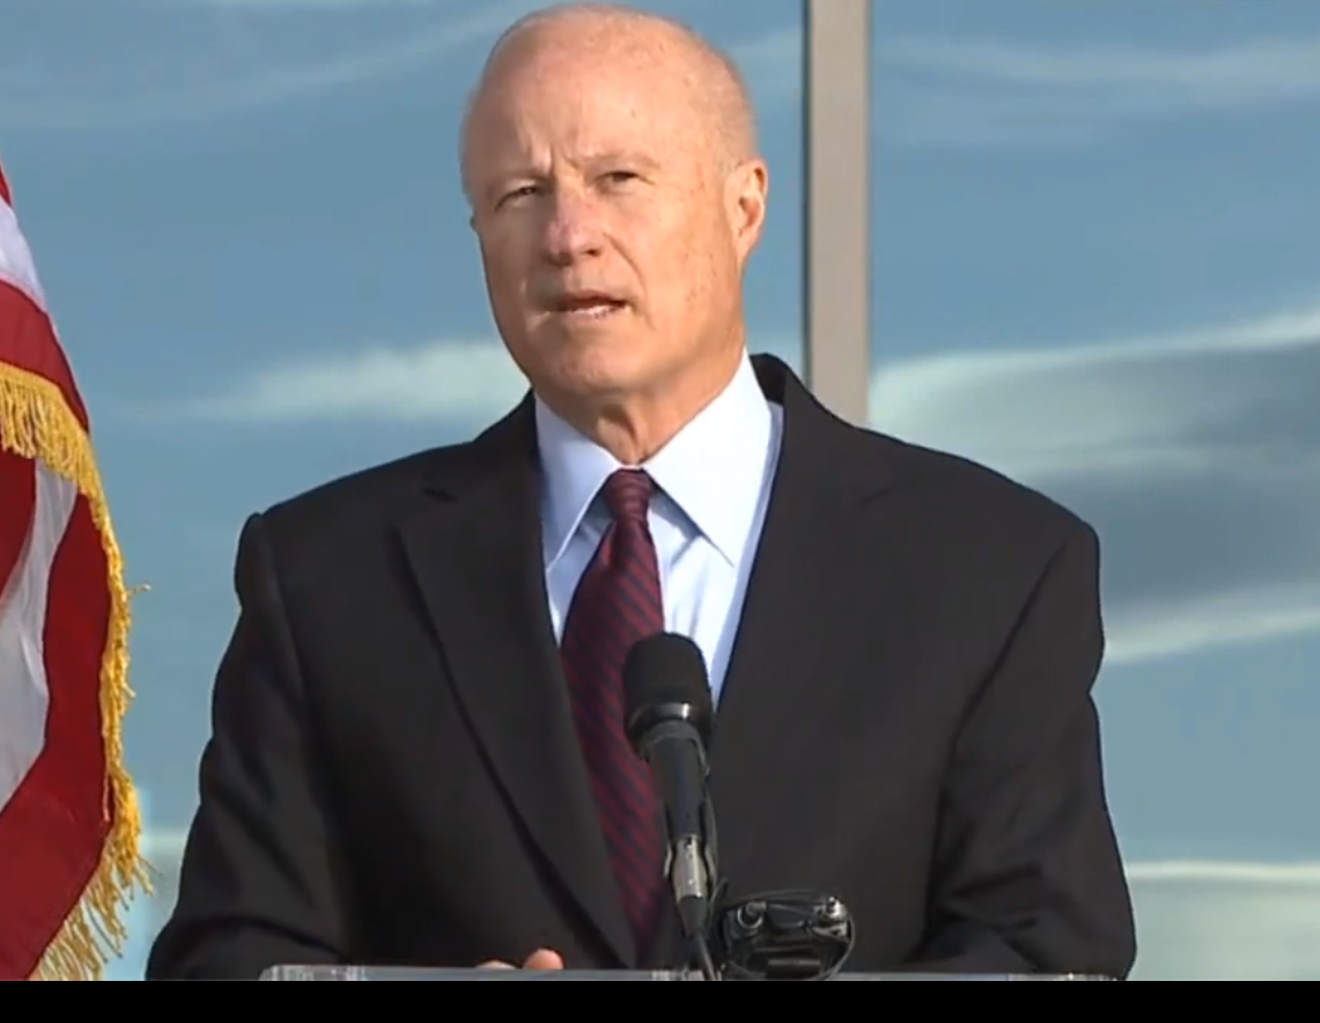 Mike Coffman moved from Congress to the Aurora mayor's office.